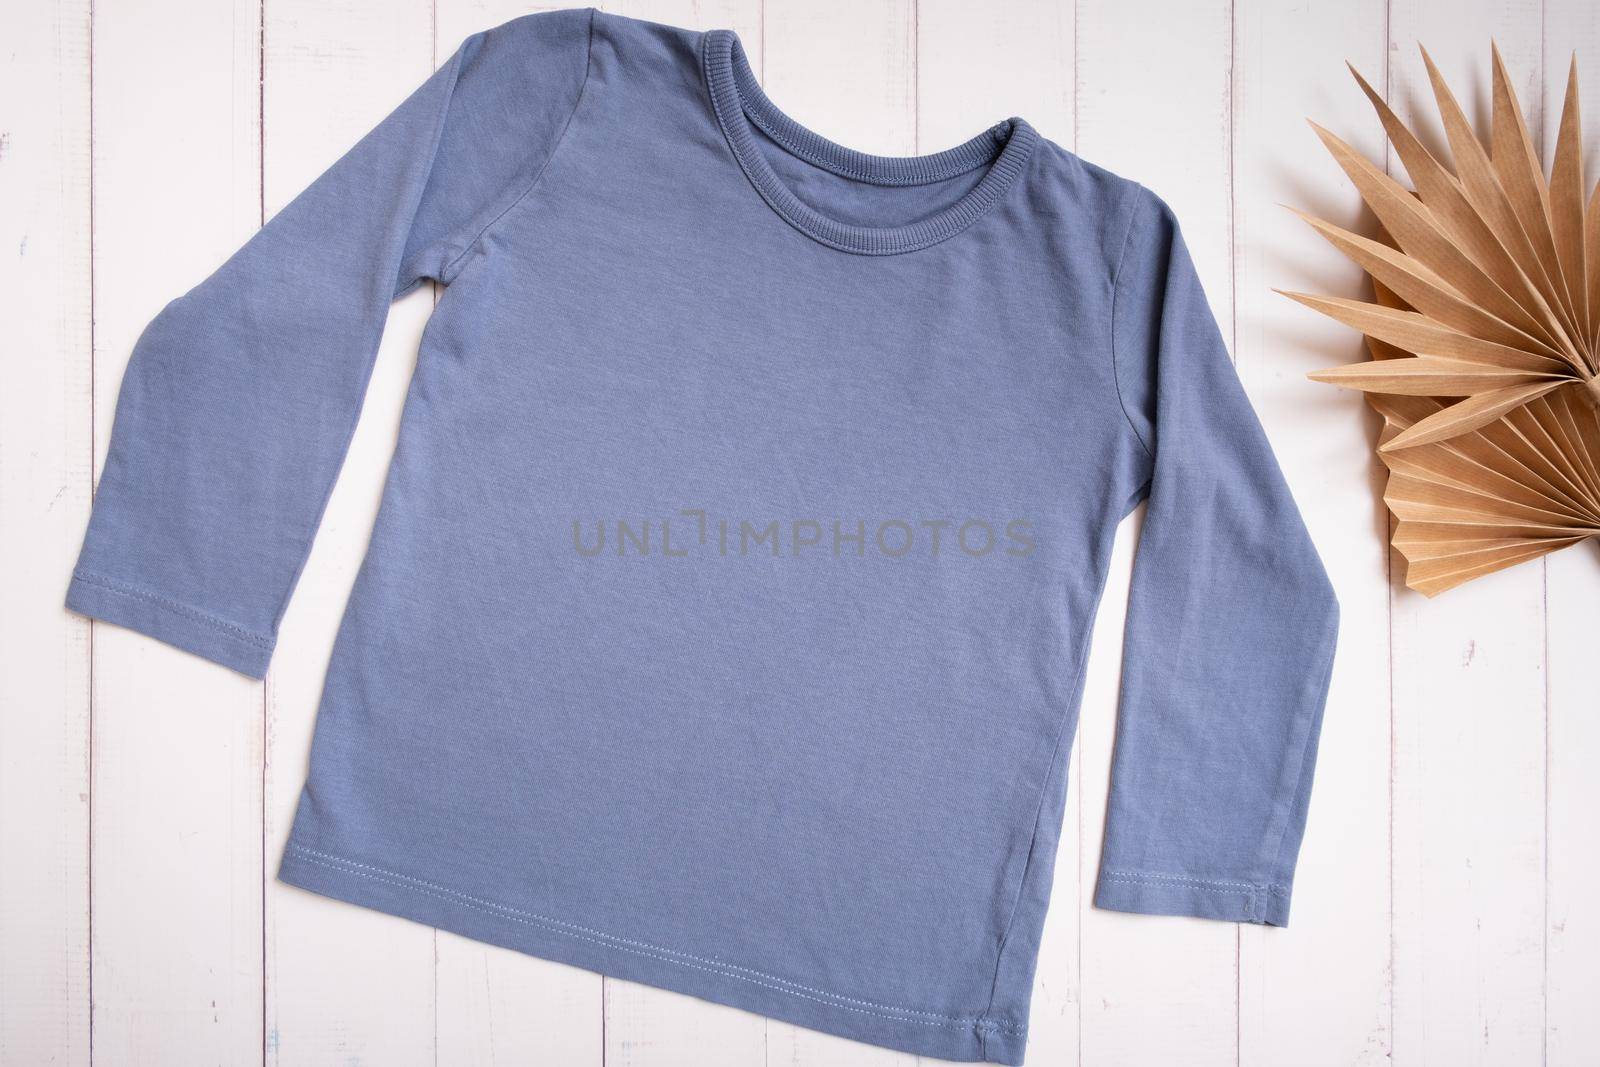 Grey baby shirt top view. Mock-up for logo, text or design on wooden background. Flat lay child clothers